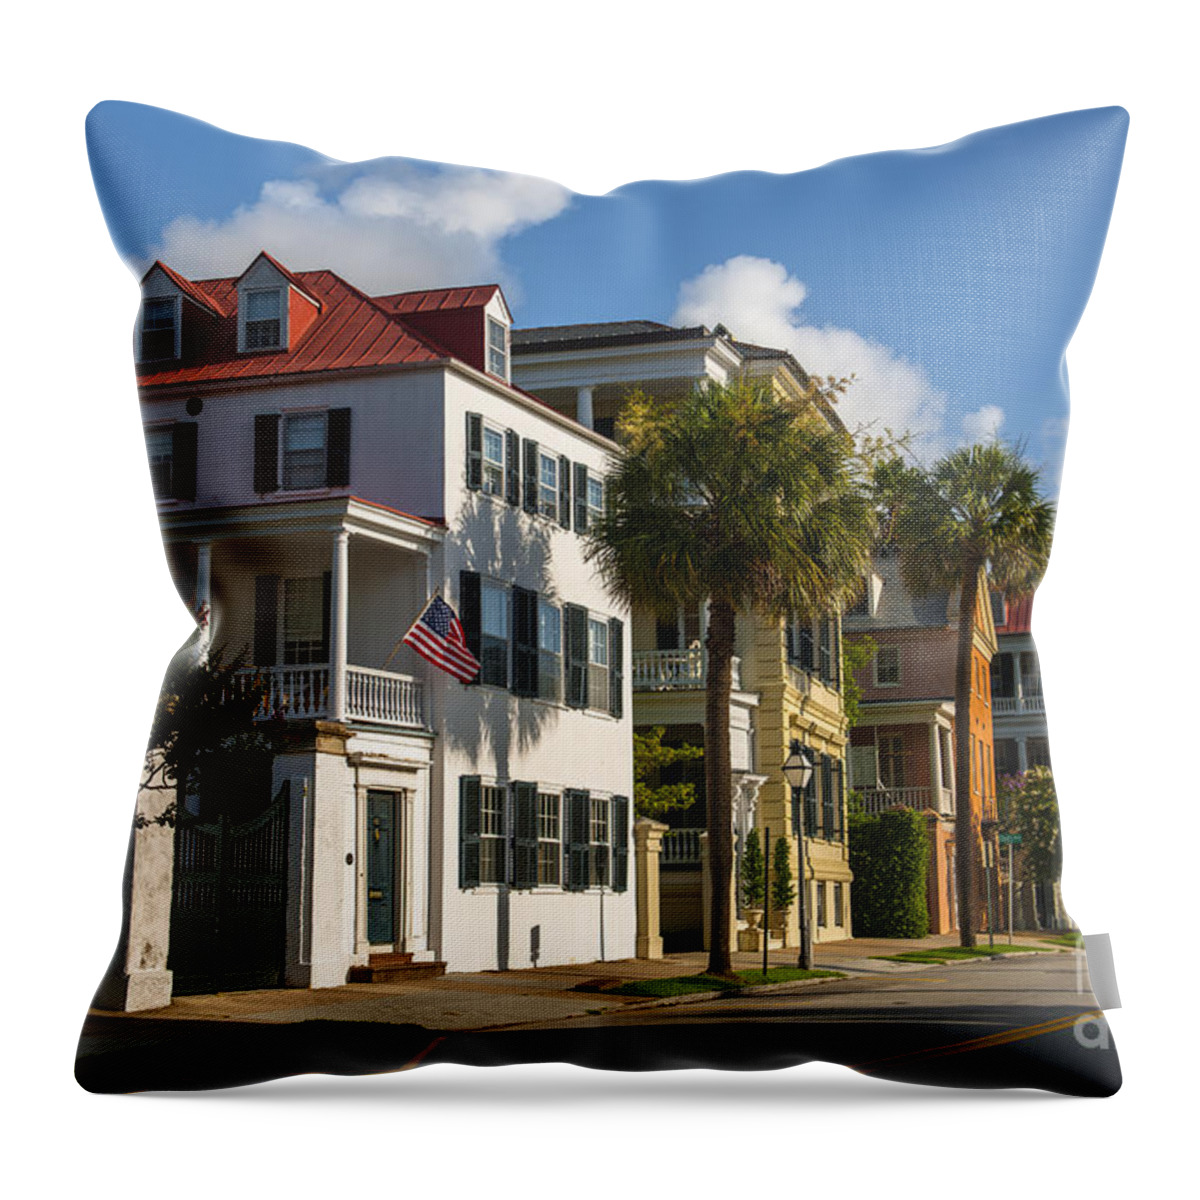 Homes Throw Pillow featuring the photograph Homes of Charleston by Dale Powell